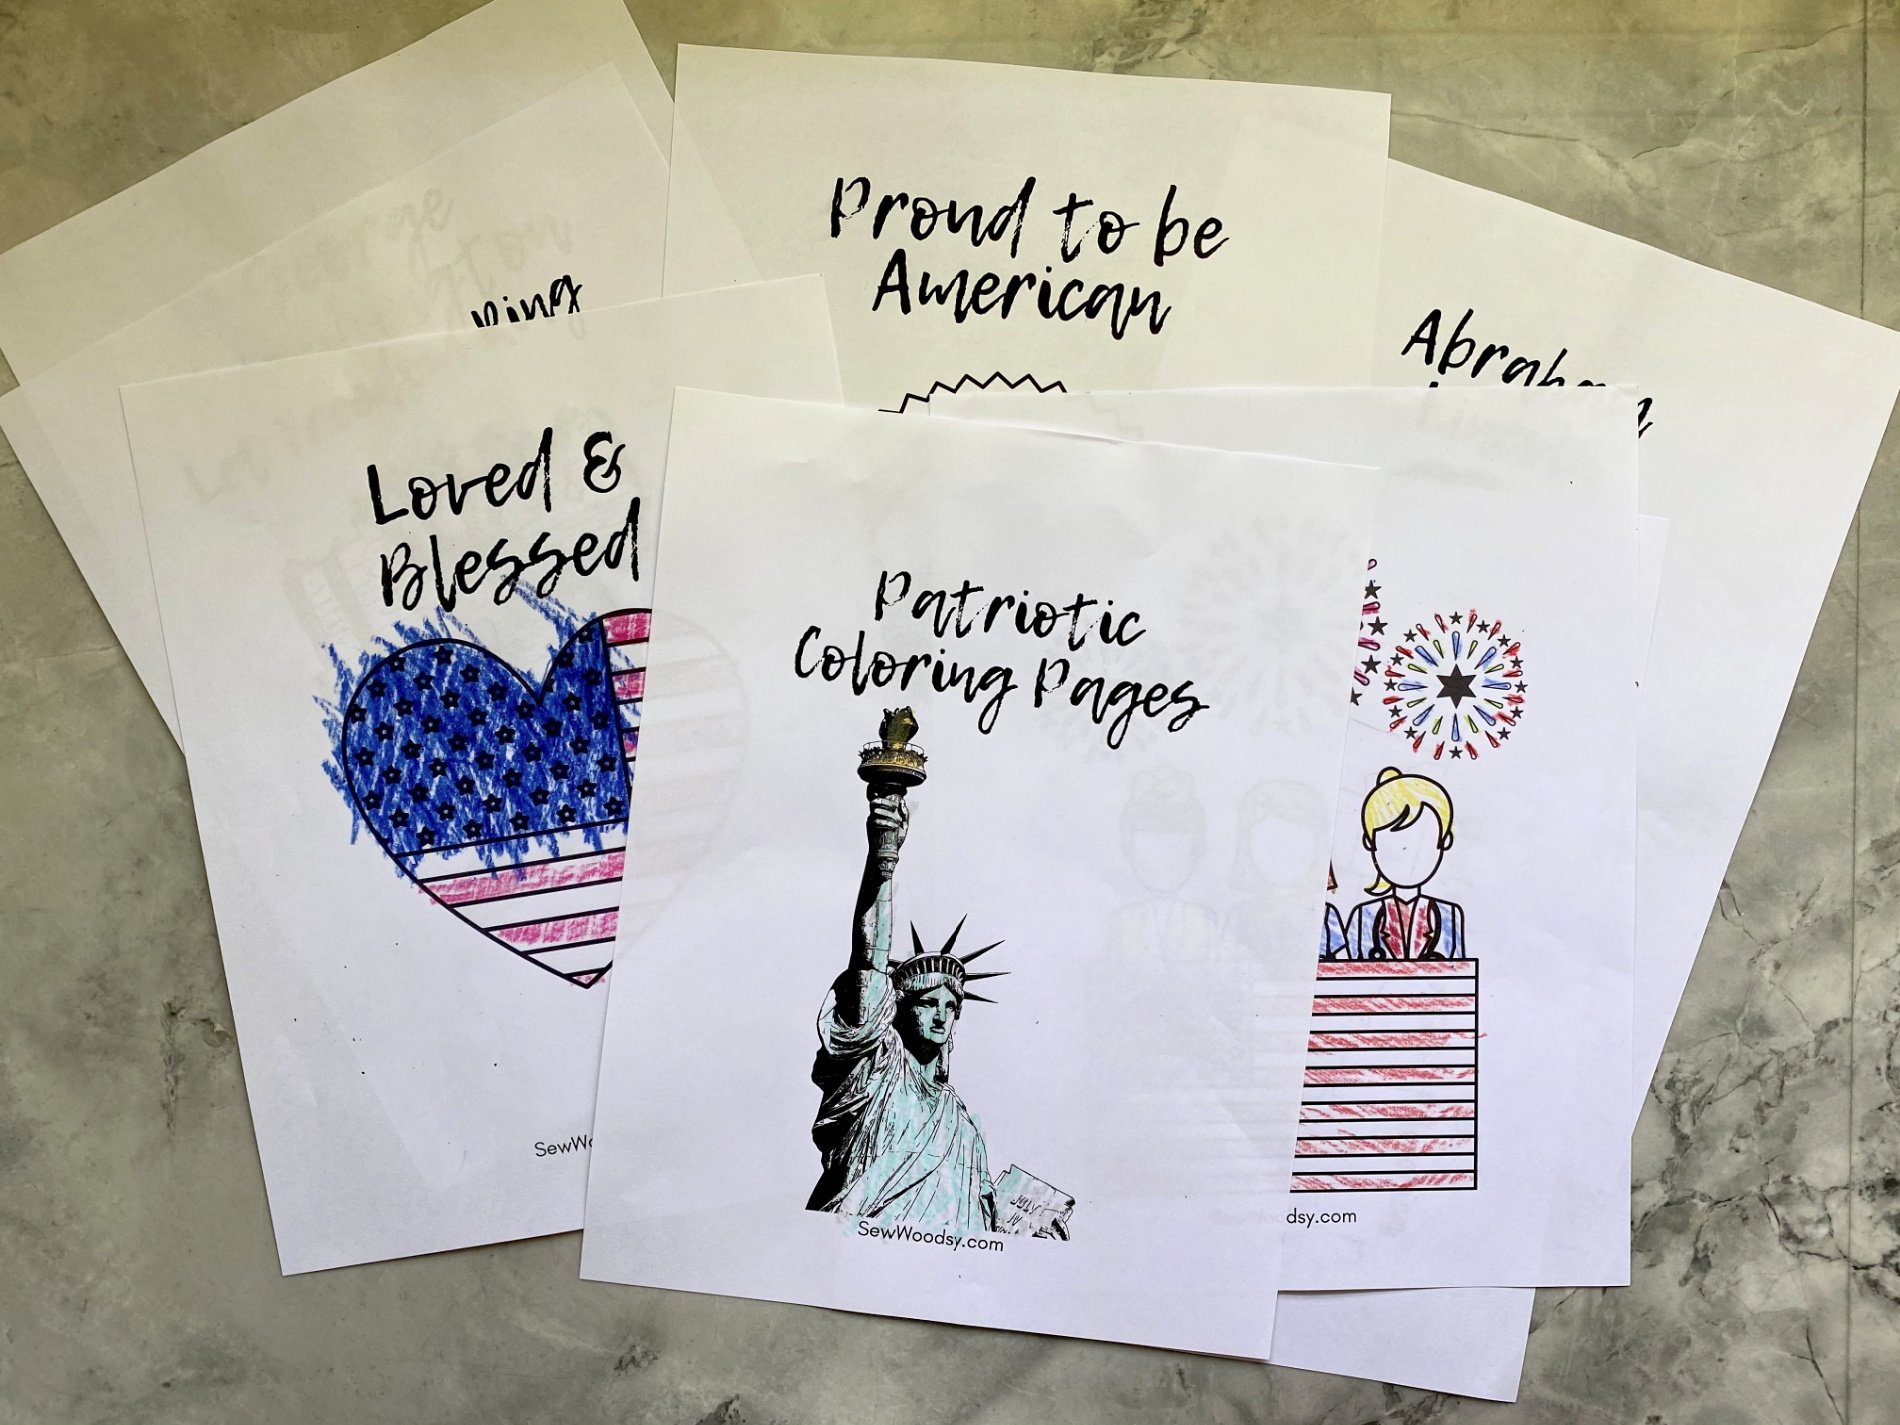 Multiple white papers with various printed and colored patriotic images and text.